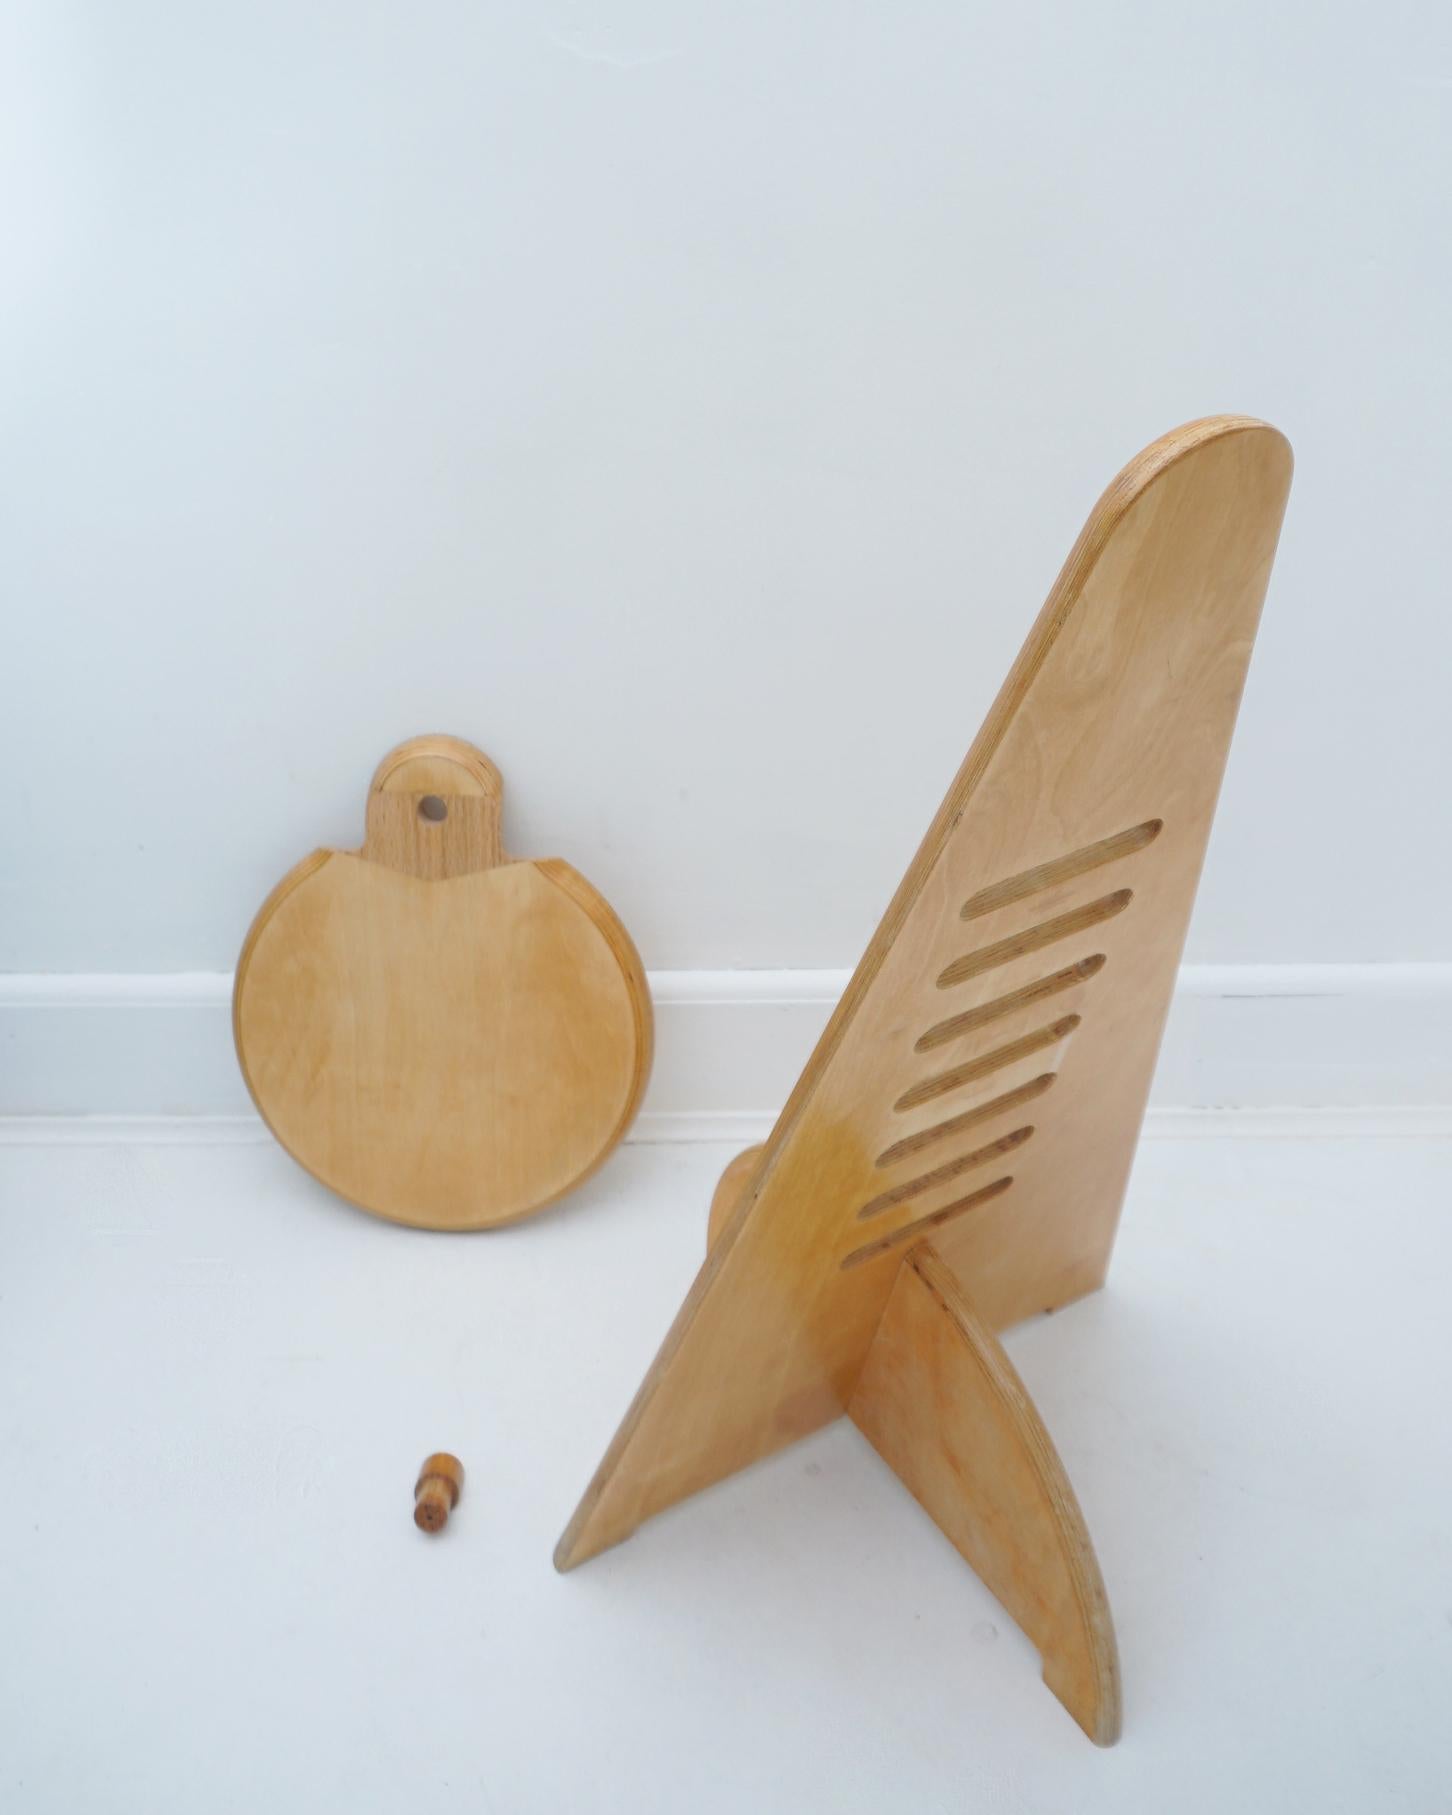 Space Age 1970s Lundi Sit Chair by Gijs Boelaars for Lundia